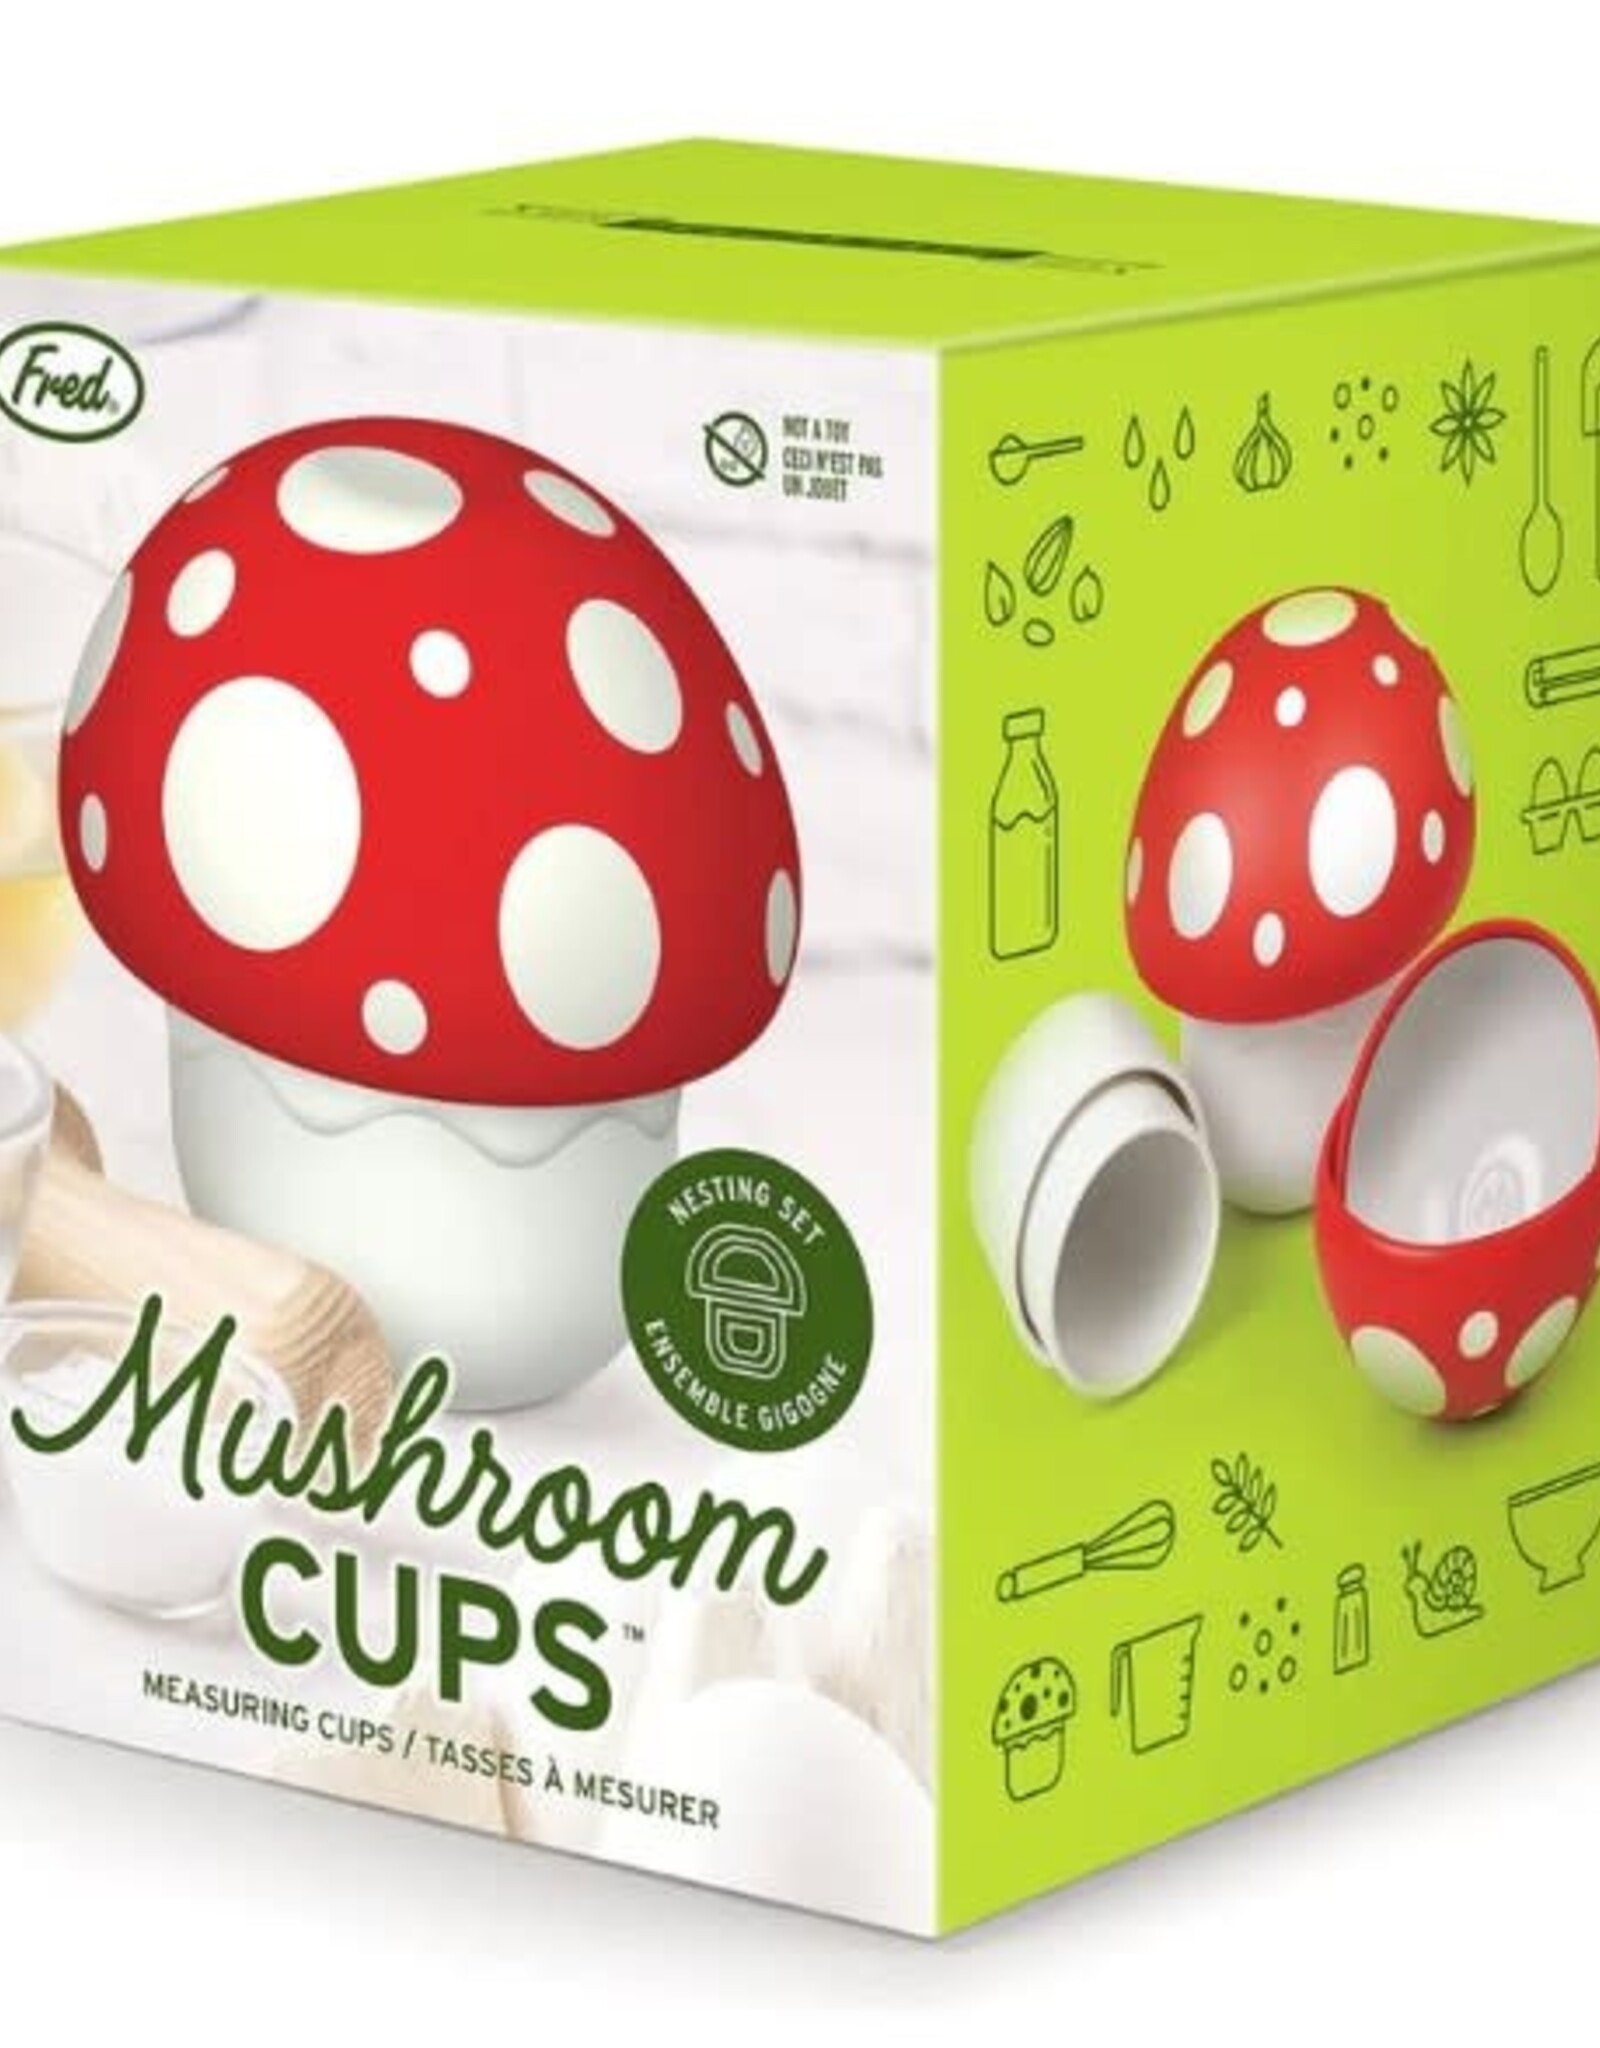 Fred & Friends MUSHROOM CUPS - MEASURING CUPS